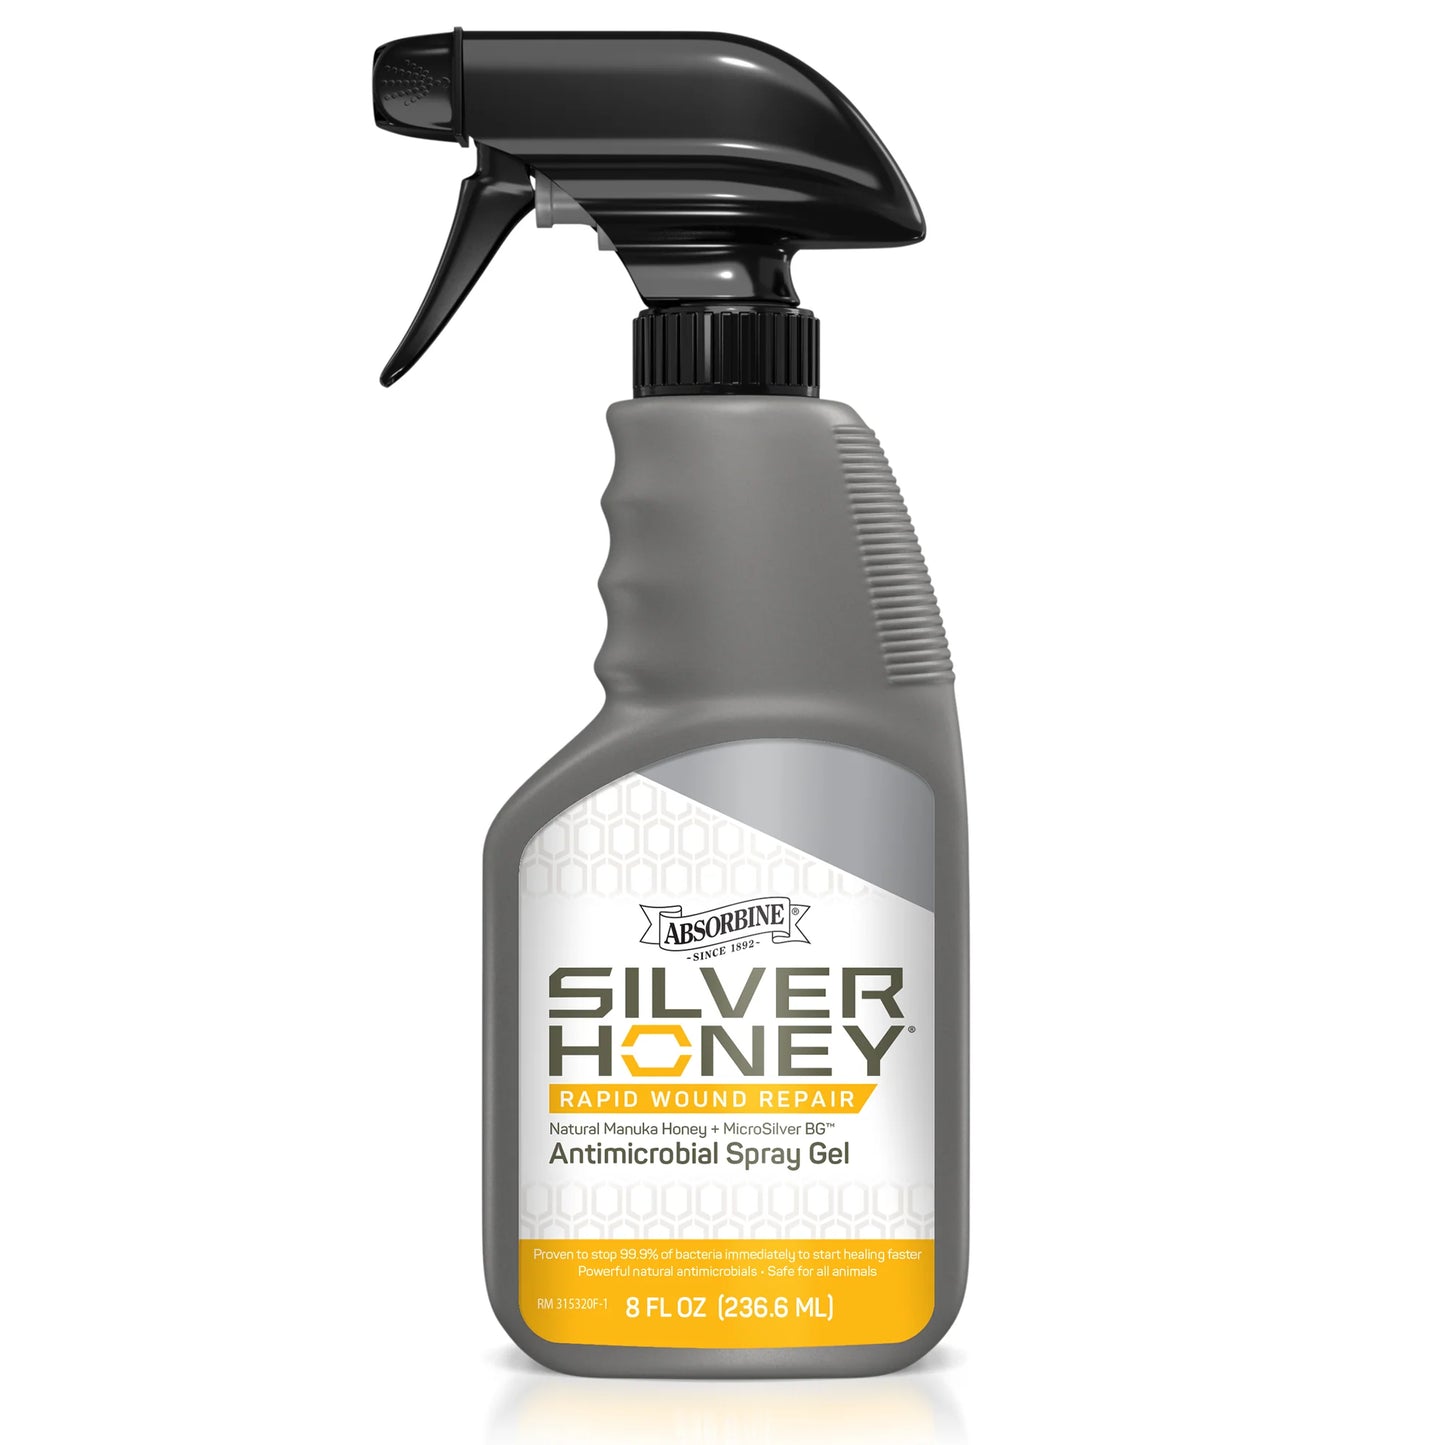 THE MISSING LINK® SILVER HONEY™ HOT SPOT & WOUND CARE OINTMENT 240 ML SPRAY BOTTLE